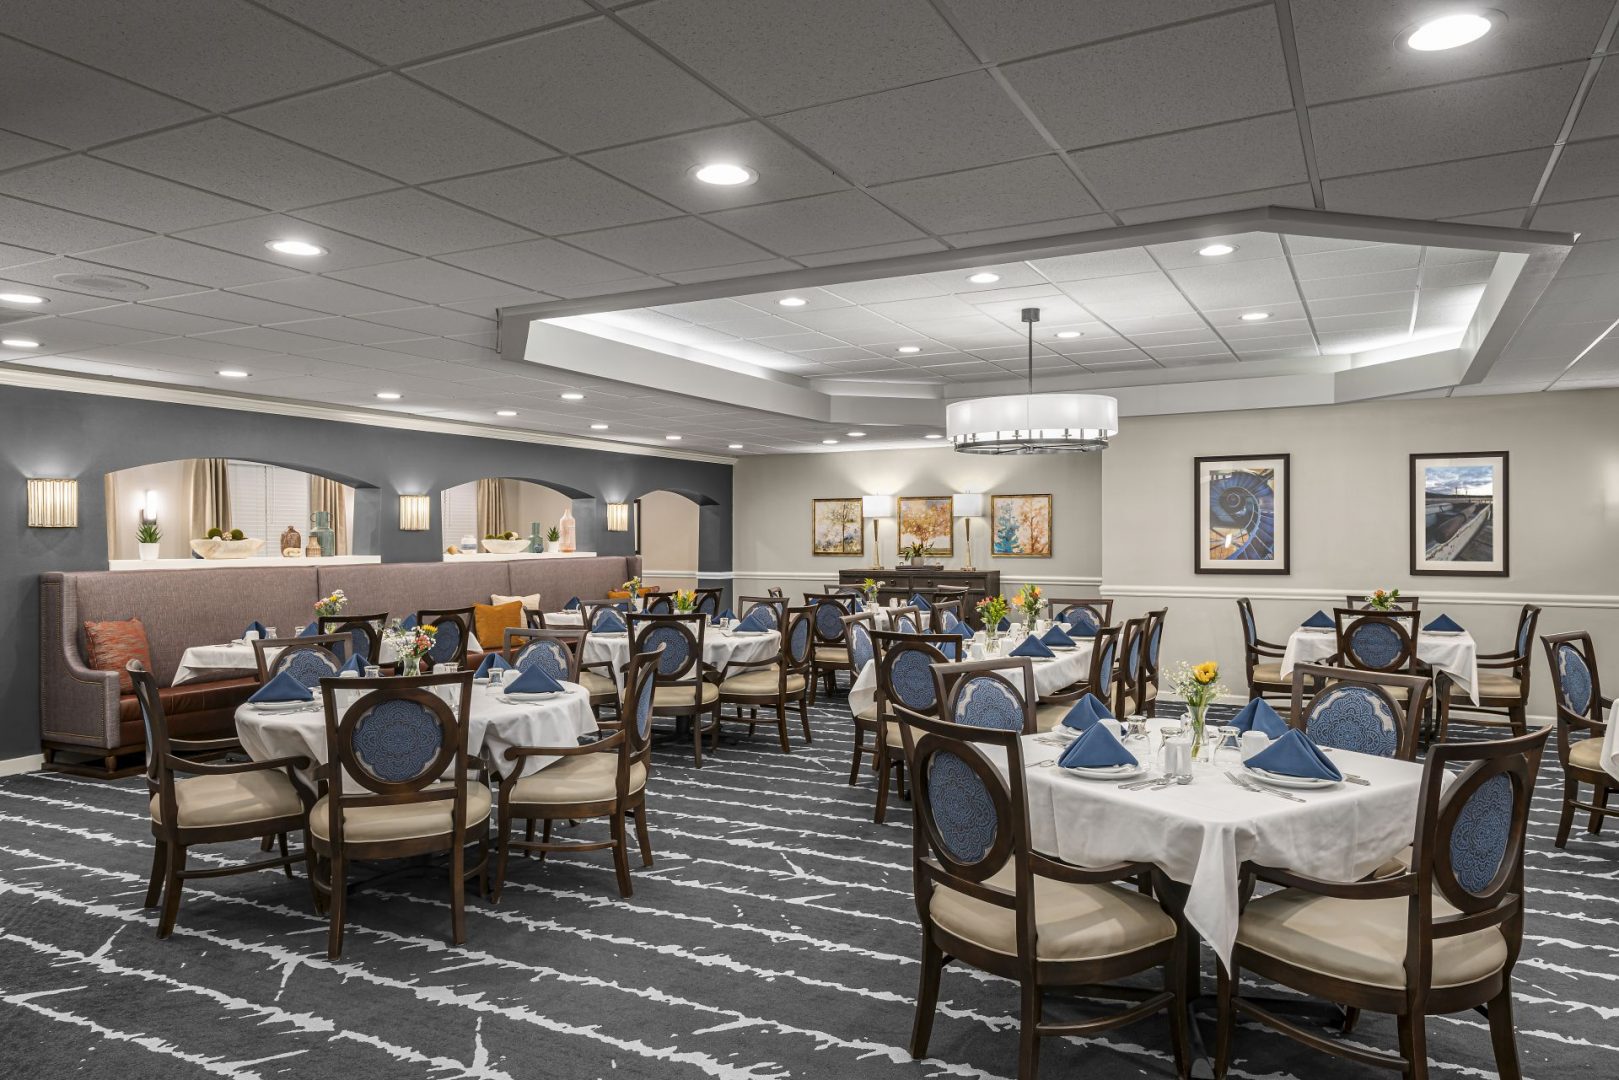 Elegant dining area in a senior living community with round tables and cushioned chairs.